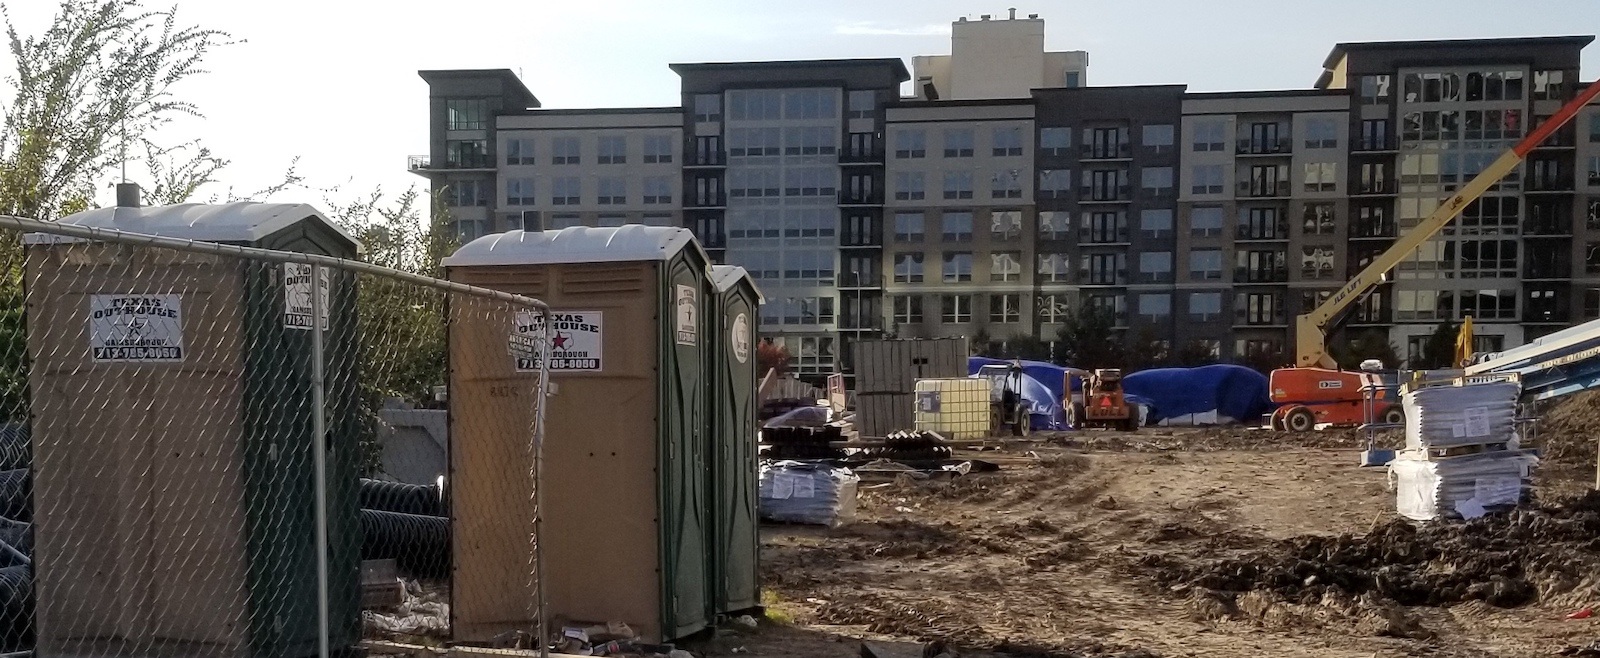 Texas Outhouse can provide portable toilets for your next construction project. Contact us today!